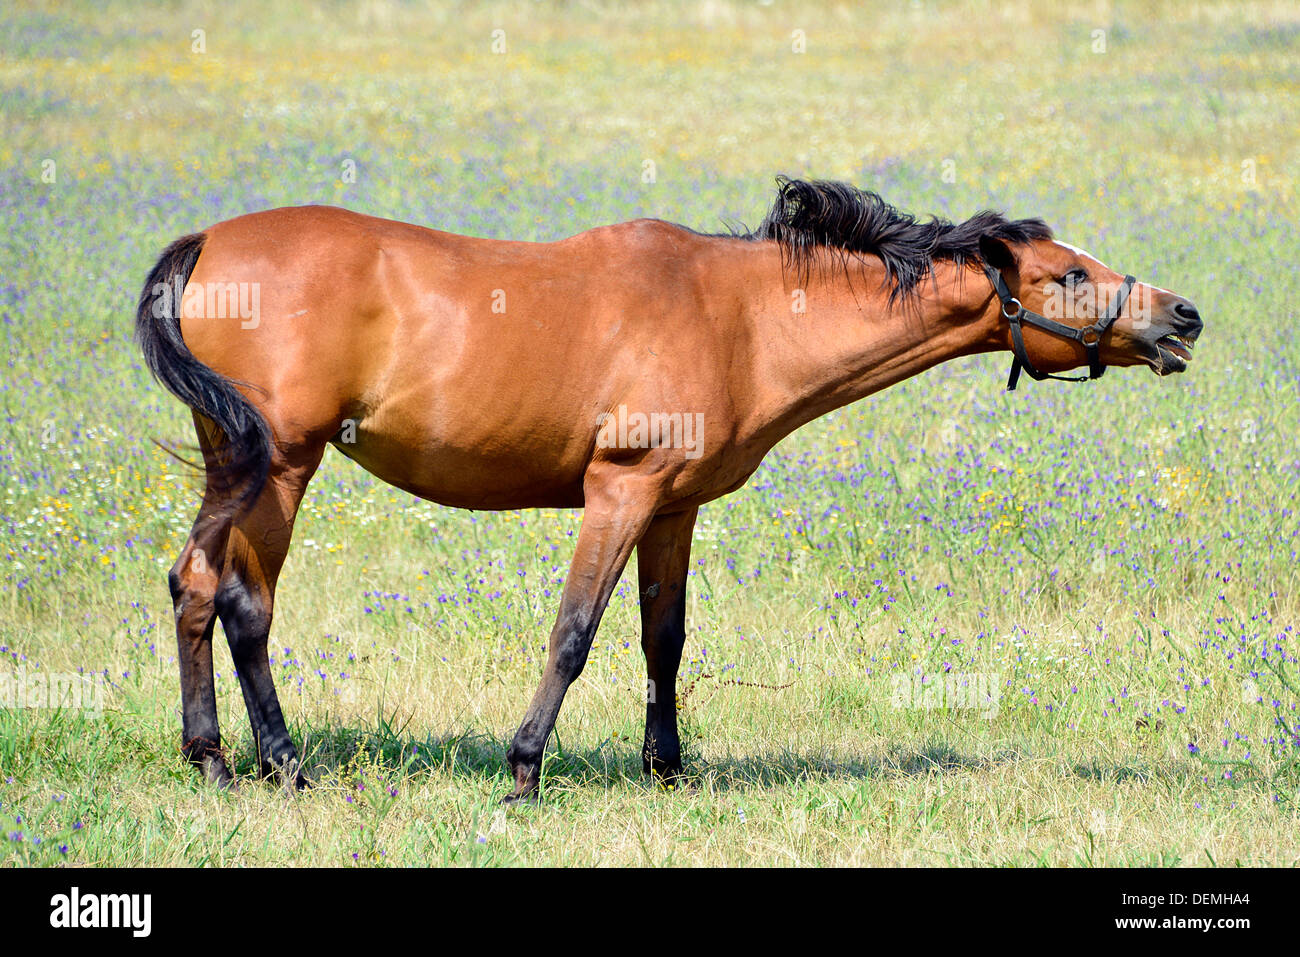 Brown horse neighing Stock Photo